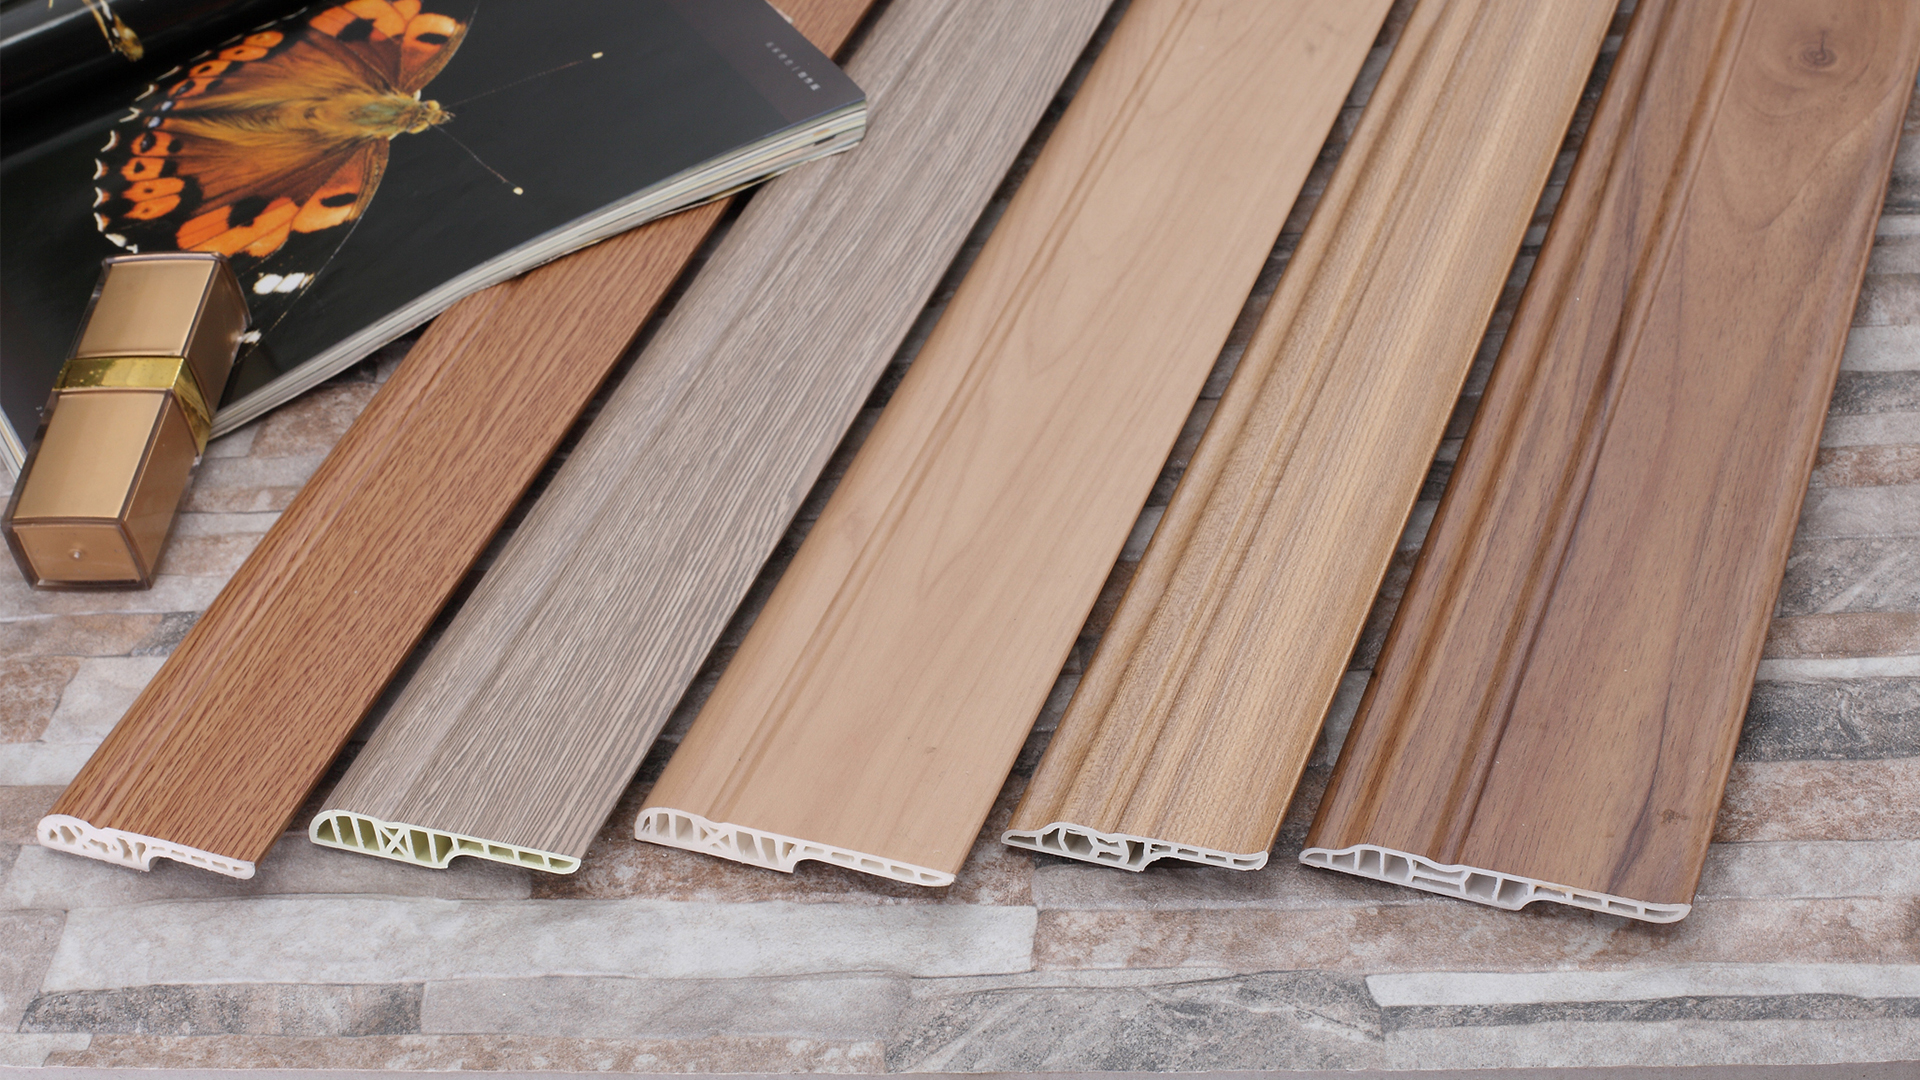 The detailed descriptions of each step involved in the production process of PVC Skirting Board